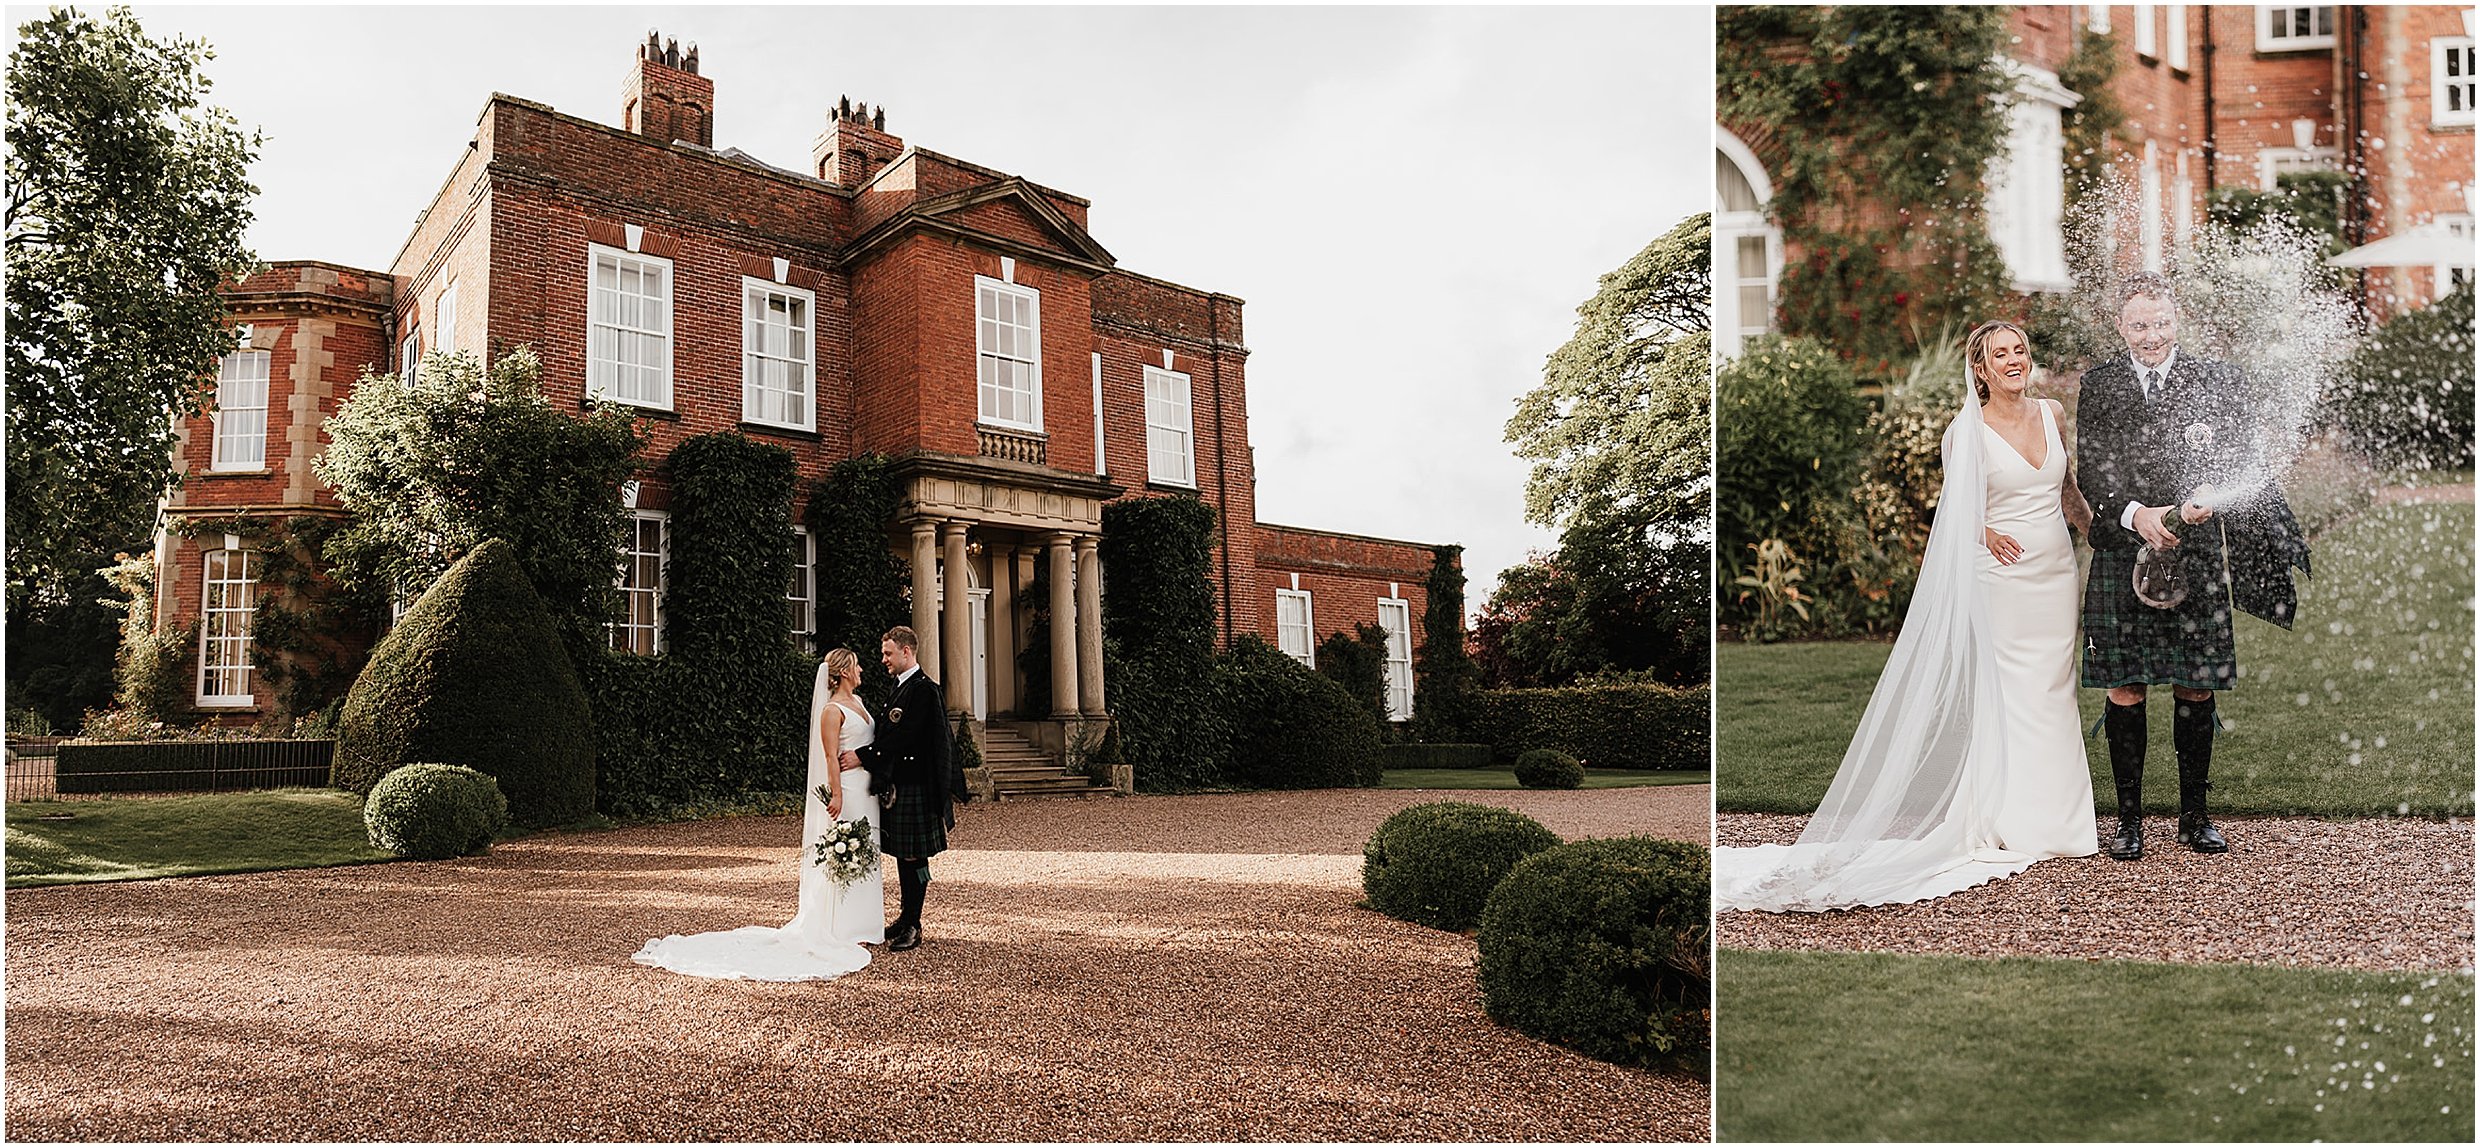 Wedding Photography at Iscoyd Park in Shropshire